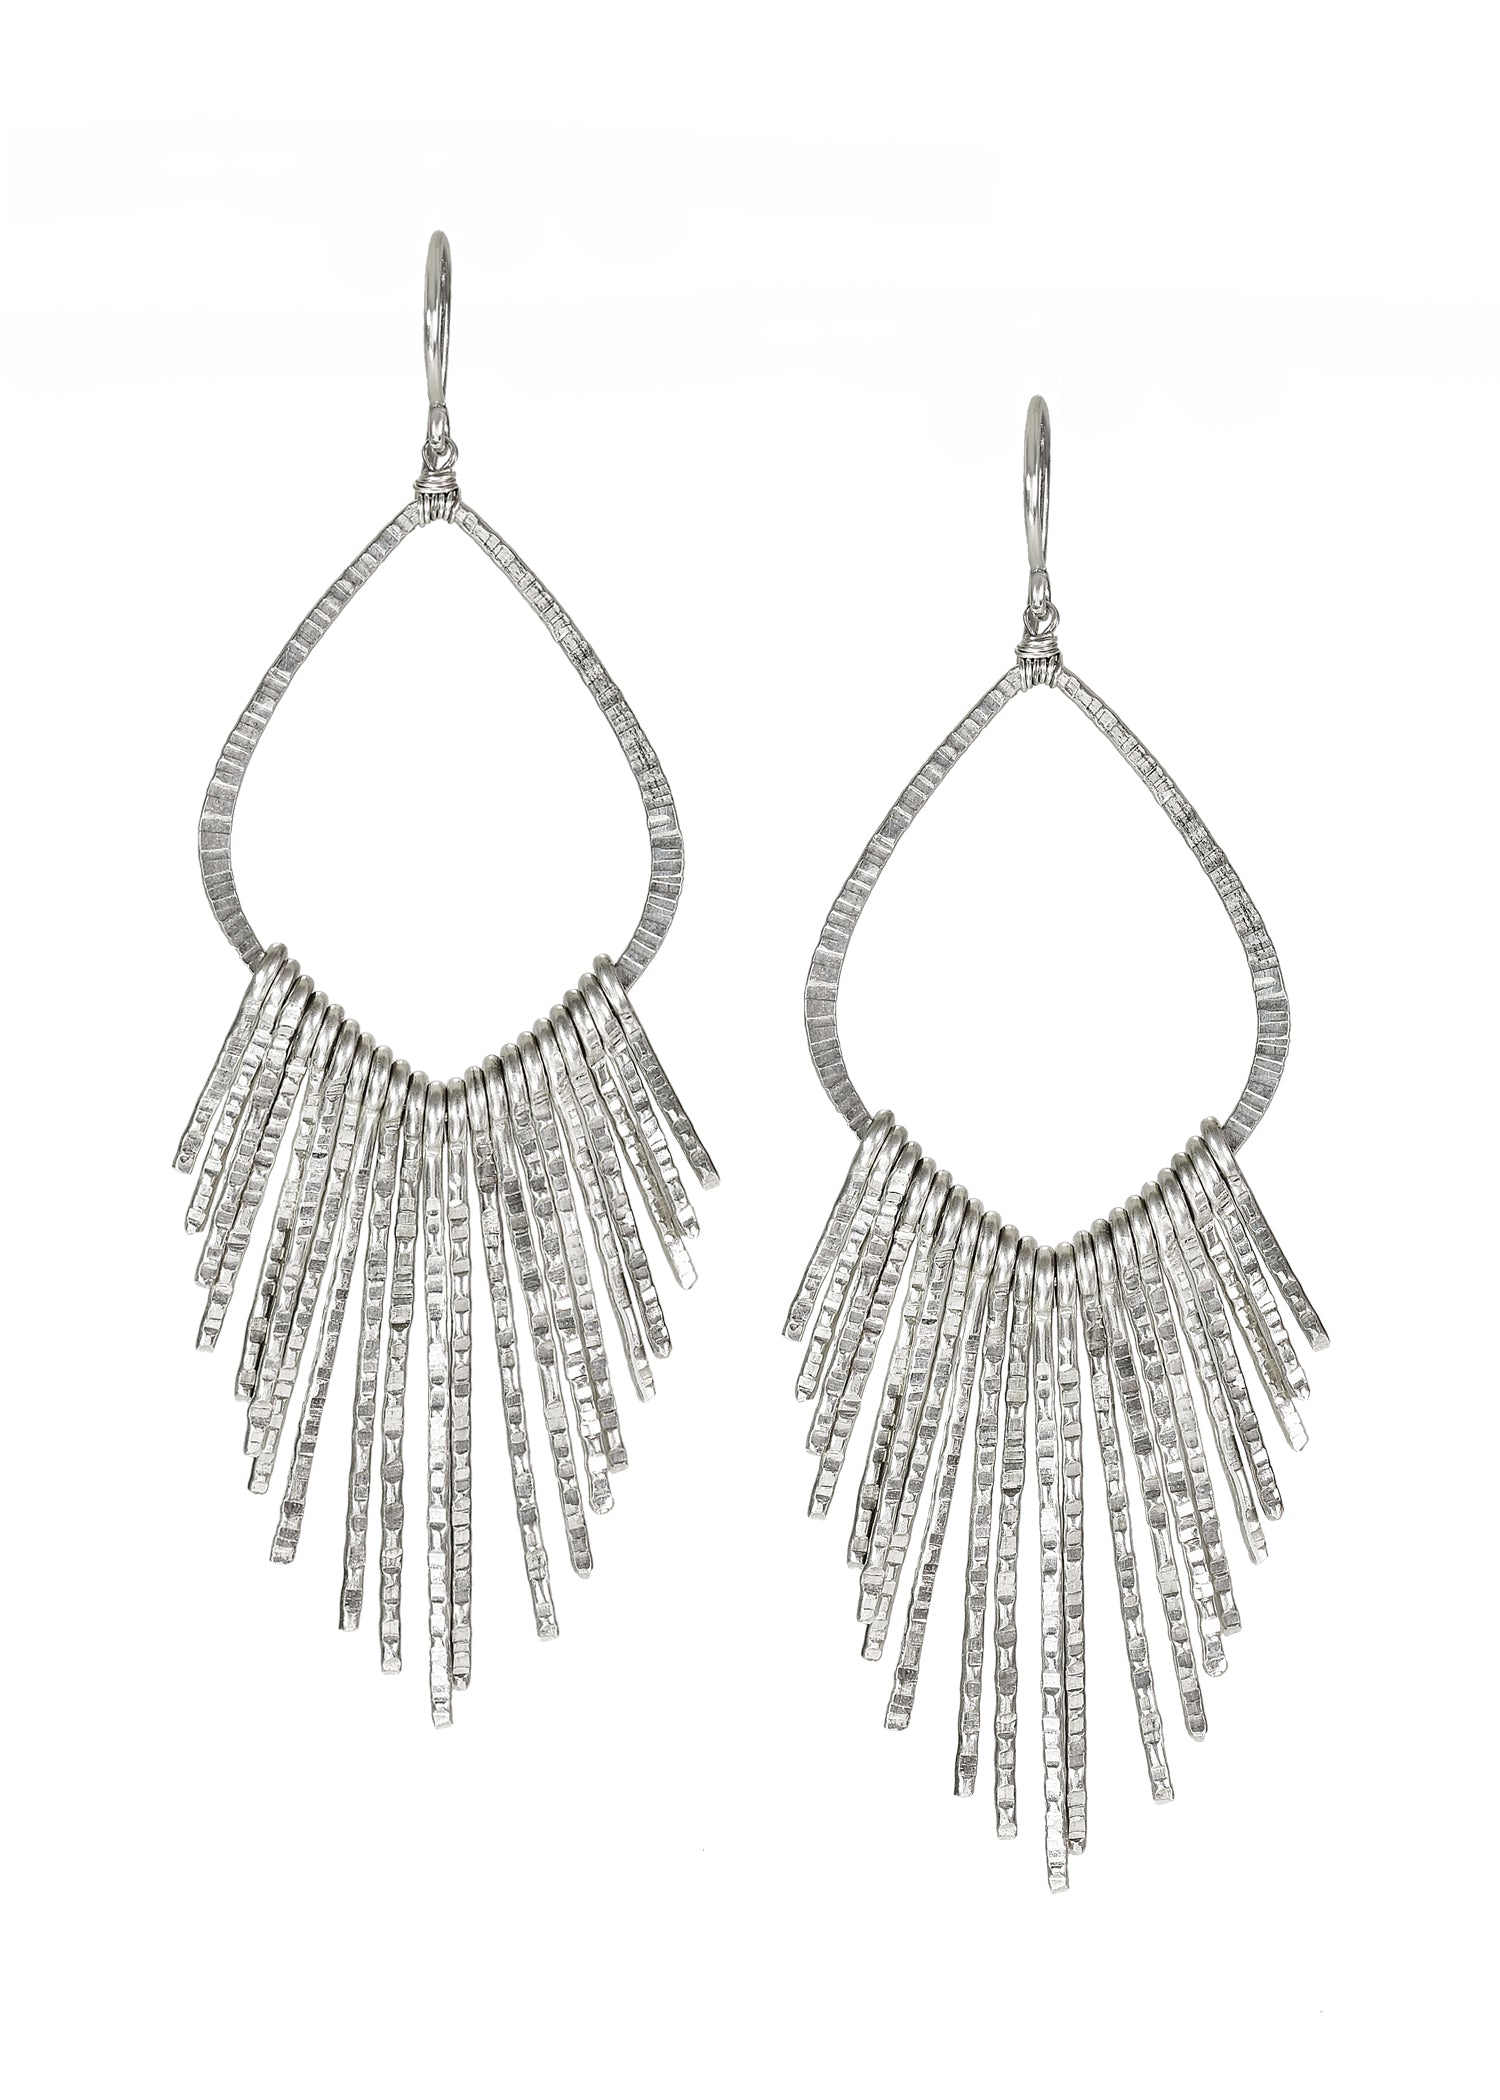 Sterling silver Earrings measure 2-7/8" in length (including the ear wires), 7/8" in width across the widest point of the frame and 1-1/8" in width across the widest point of the spangles Handmade in our Los Angeles studio